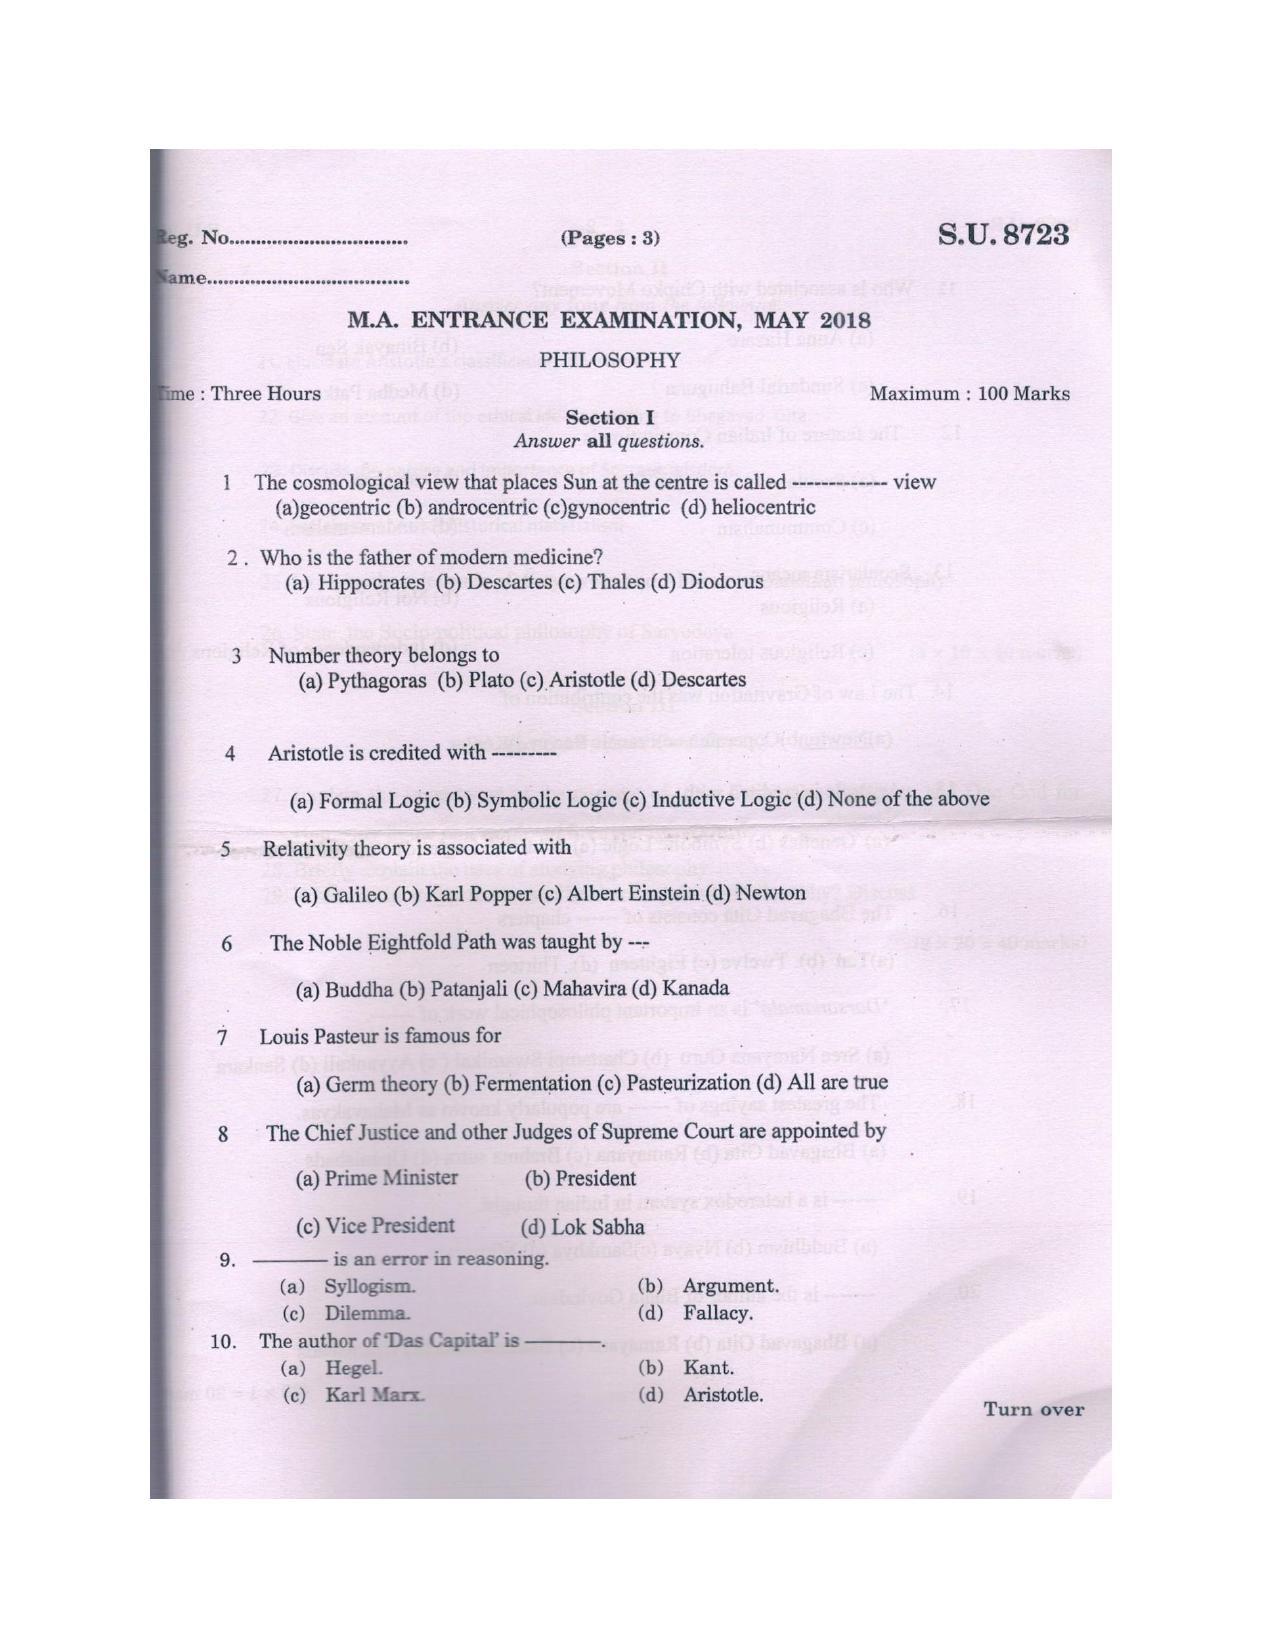 SSUS Entrance Exam PHILOSOPHY 2018 Question Paper - Page 1